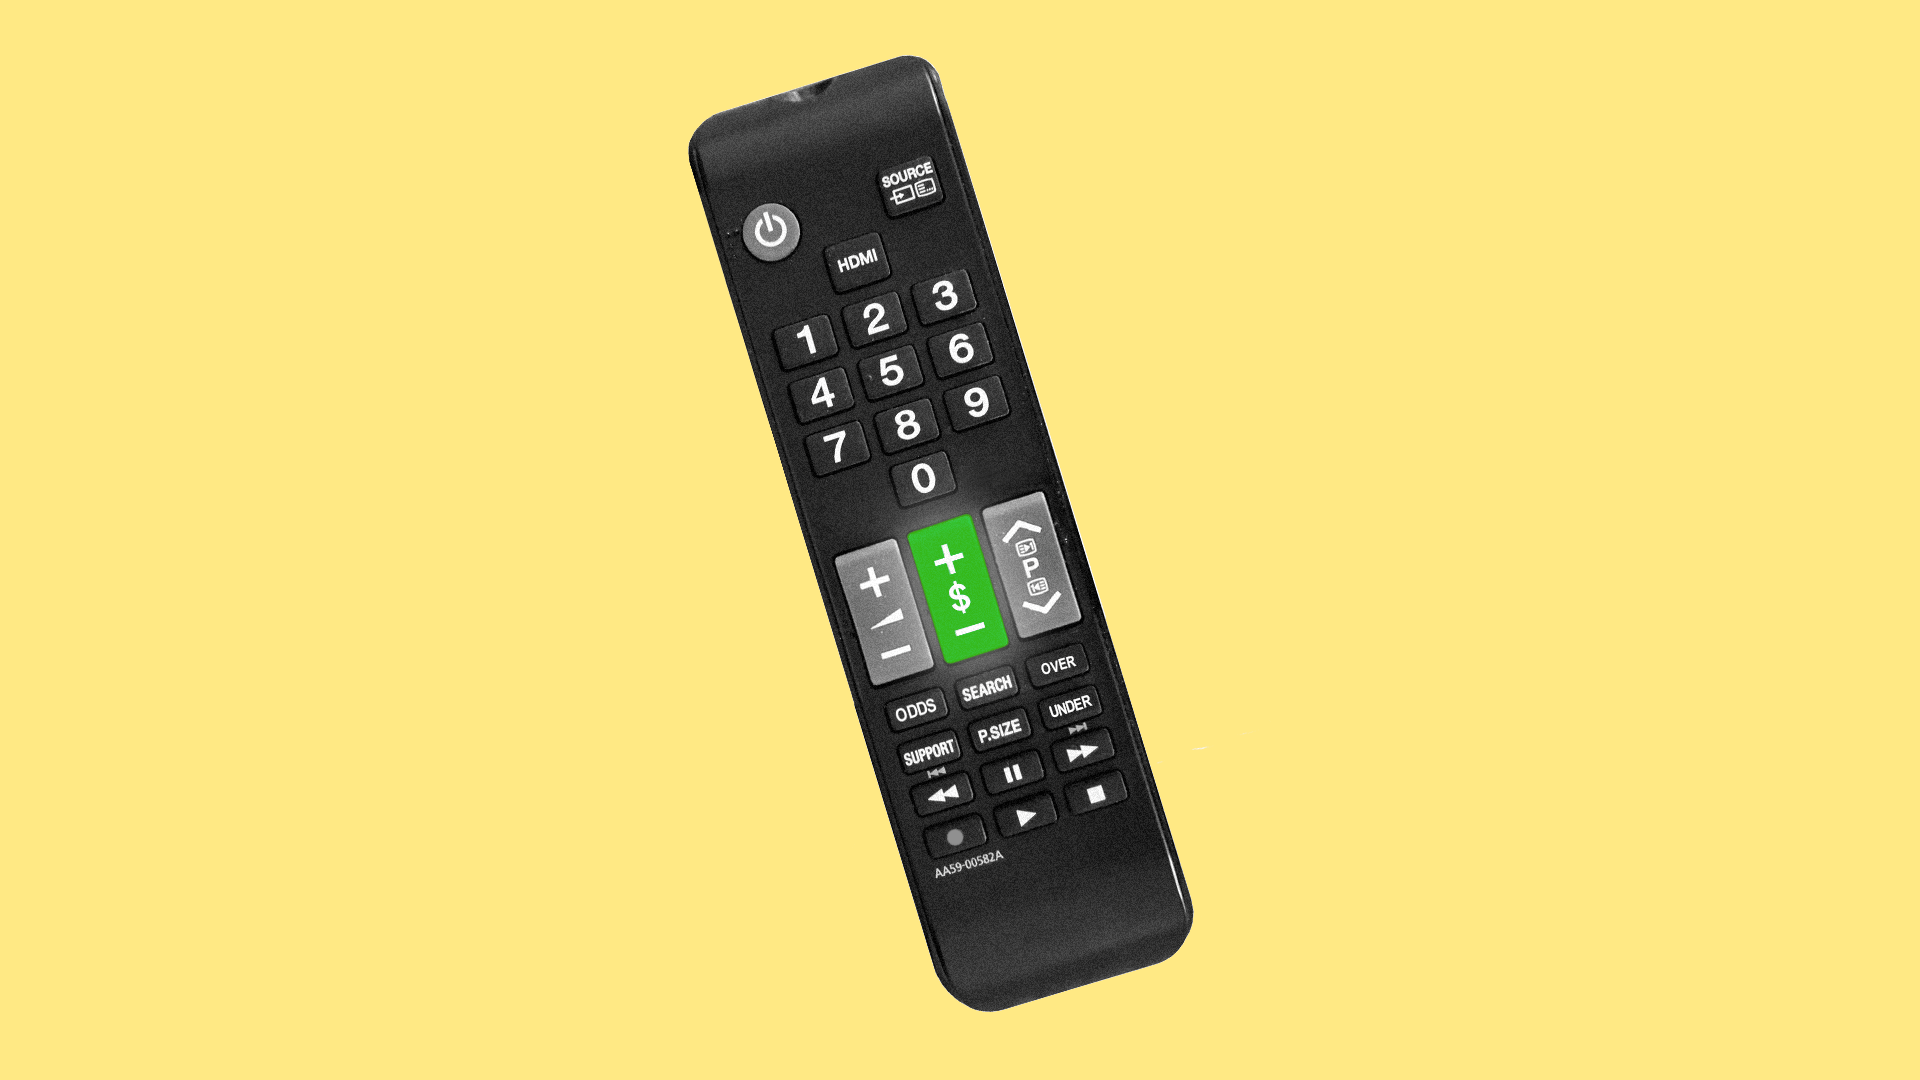 Illustration of a modified television remote control with buttons to increase or decrease bet amounts